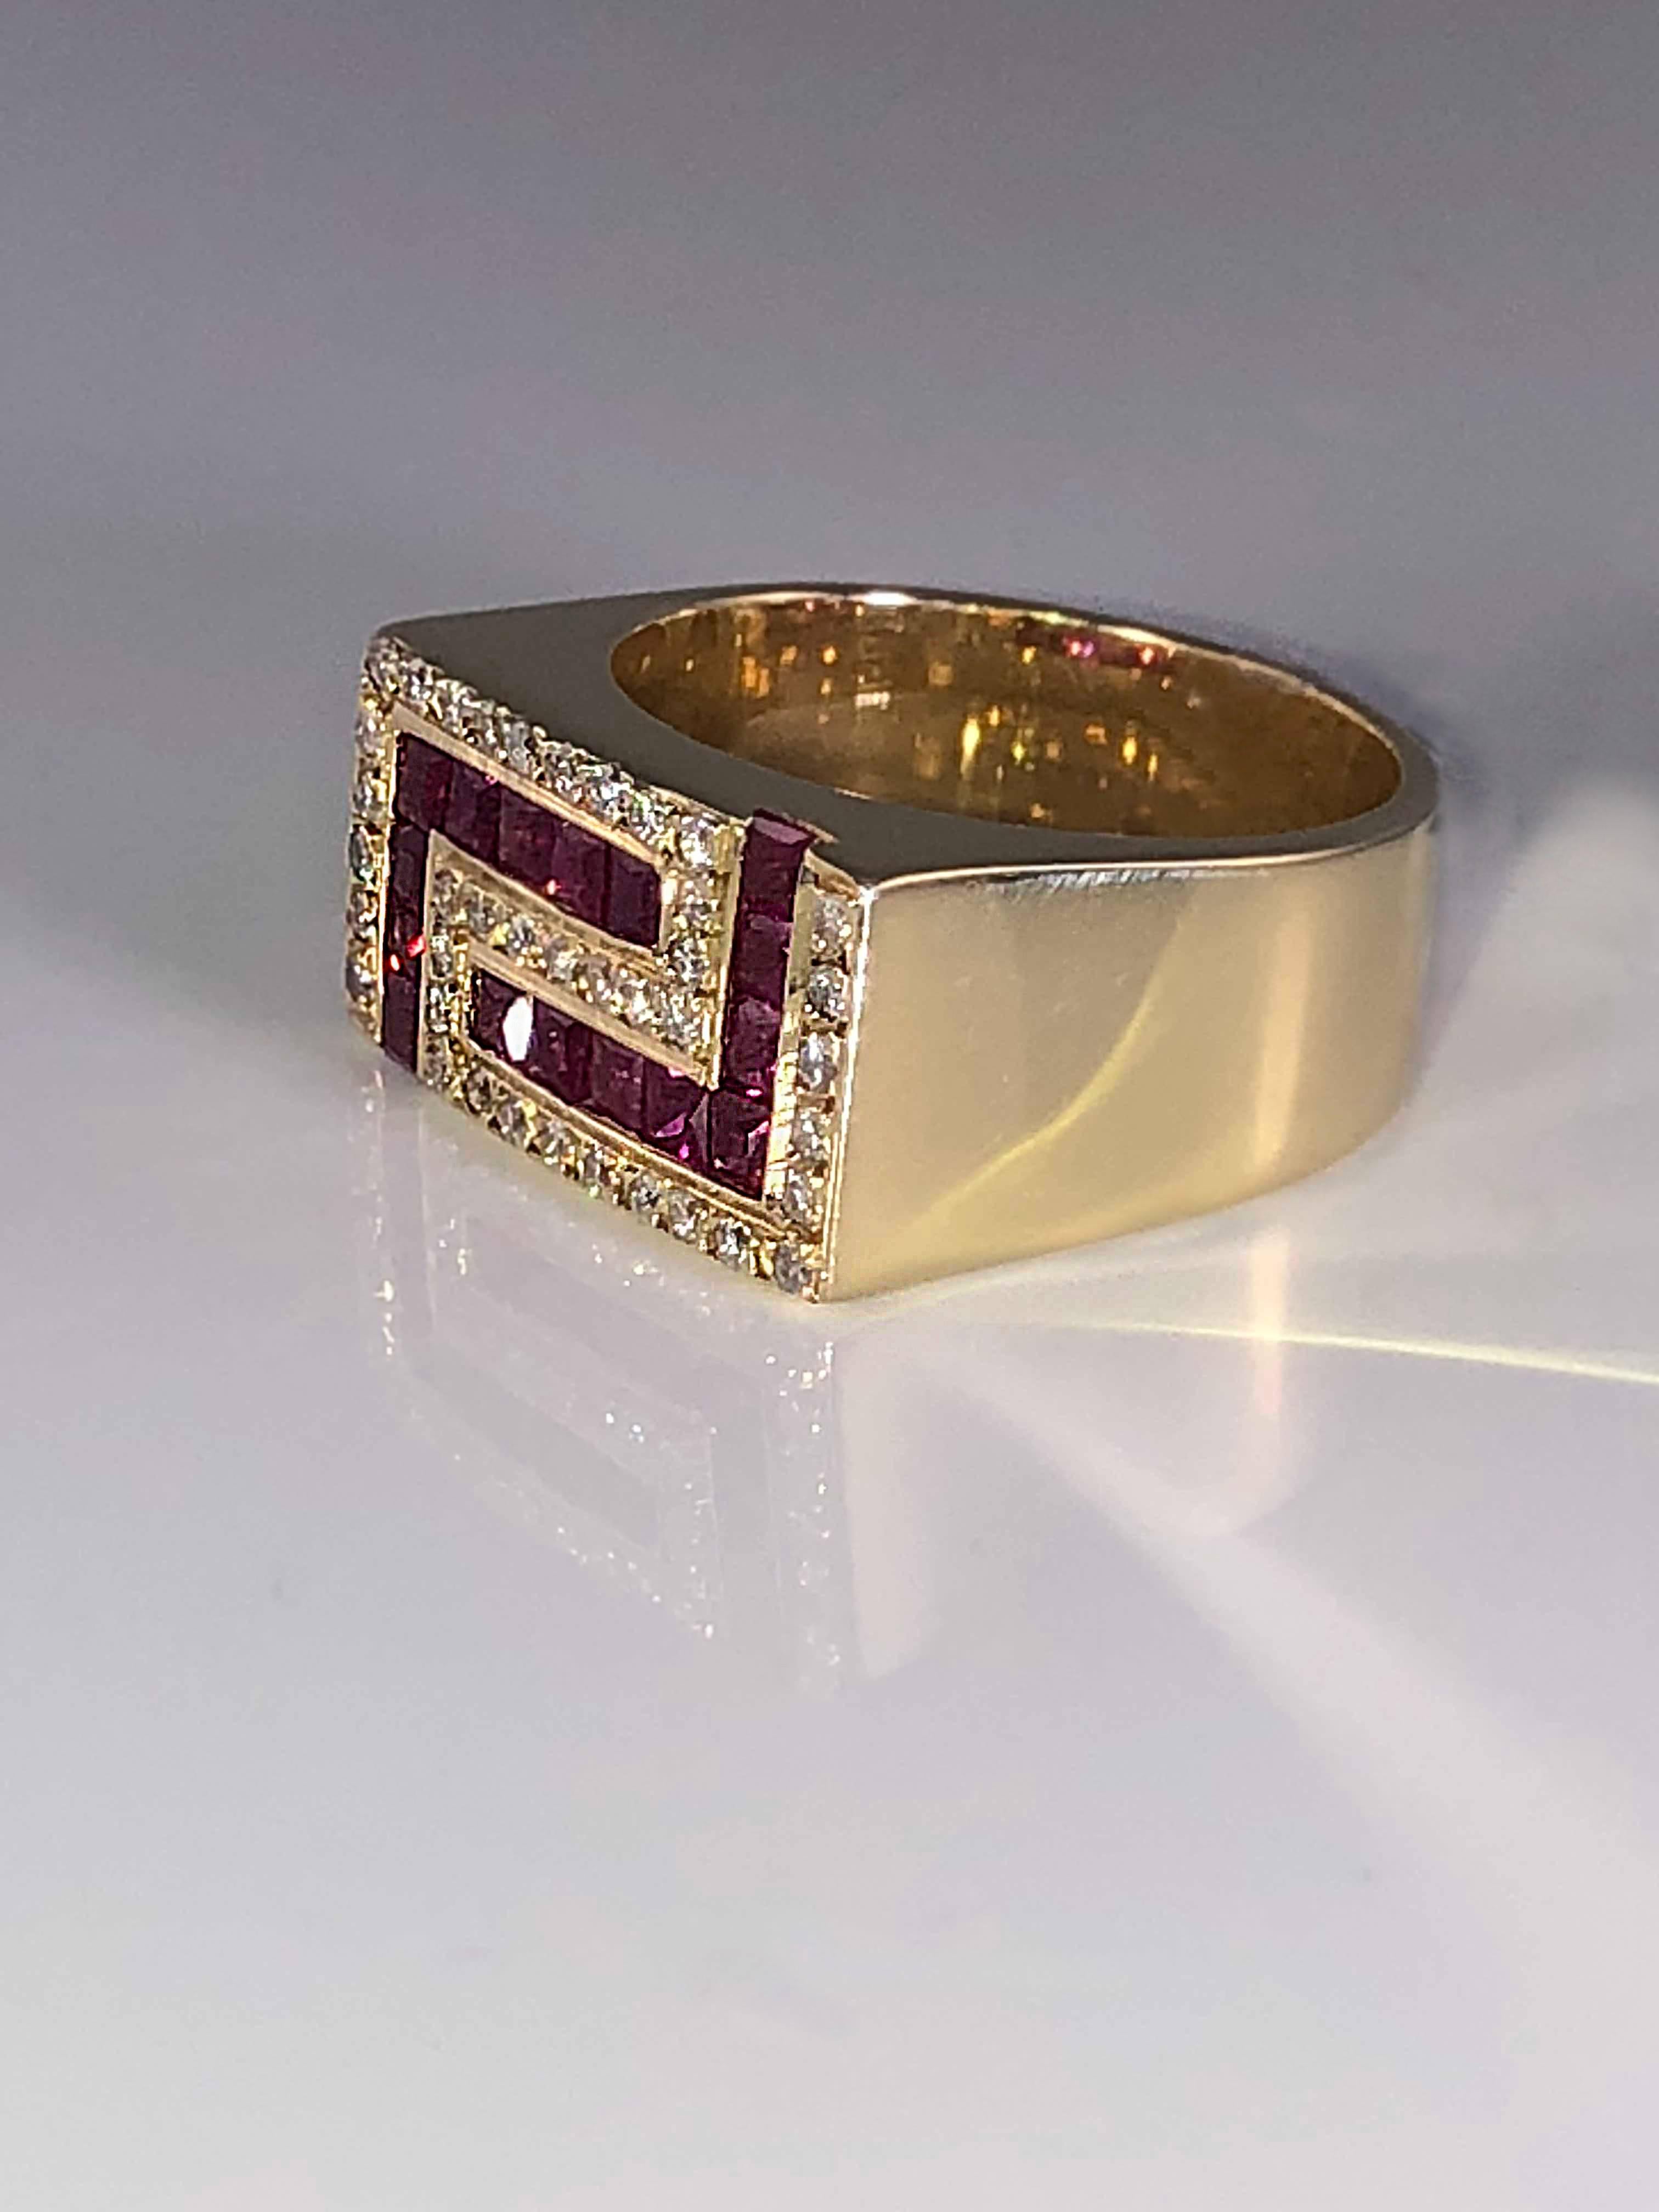 This beautiful men's or woman's S. Georgios ring is crafted from 18 Karat Yellow Gold and features the Greek Key design symbolizing eternity. White brilliant cut Diamonds with a total weight of 0.35 Carats are in contrast with Princess cut rubies